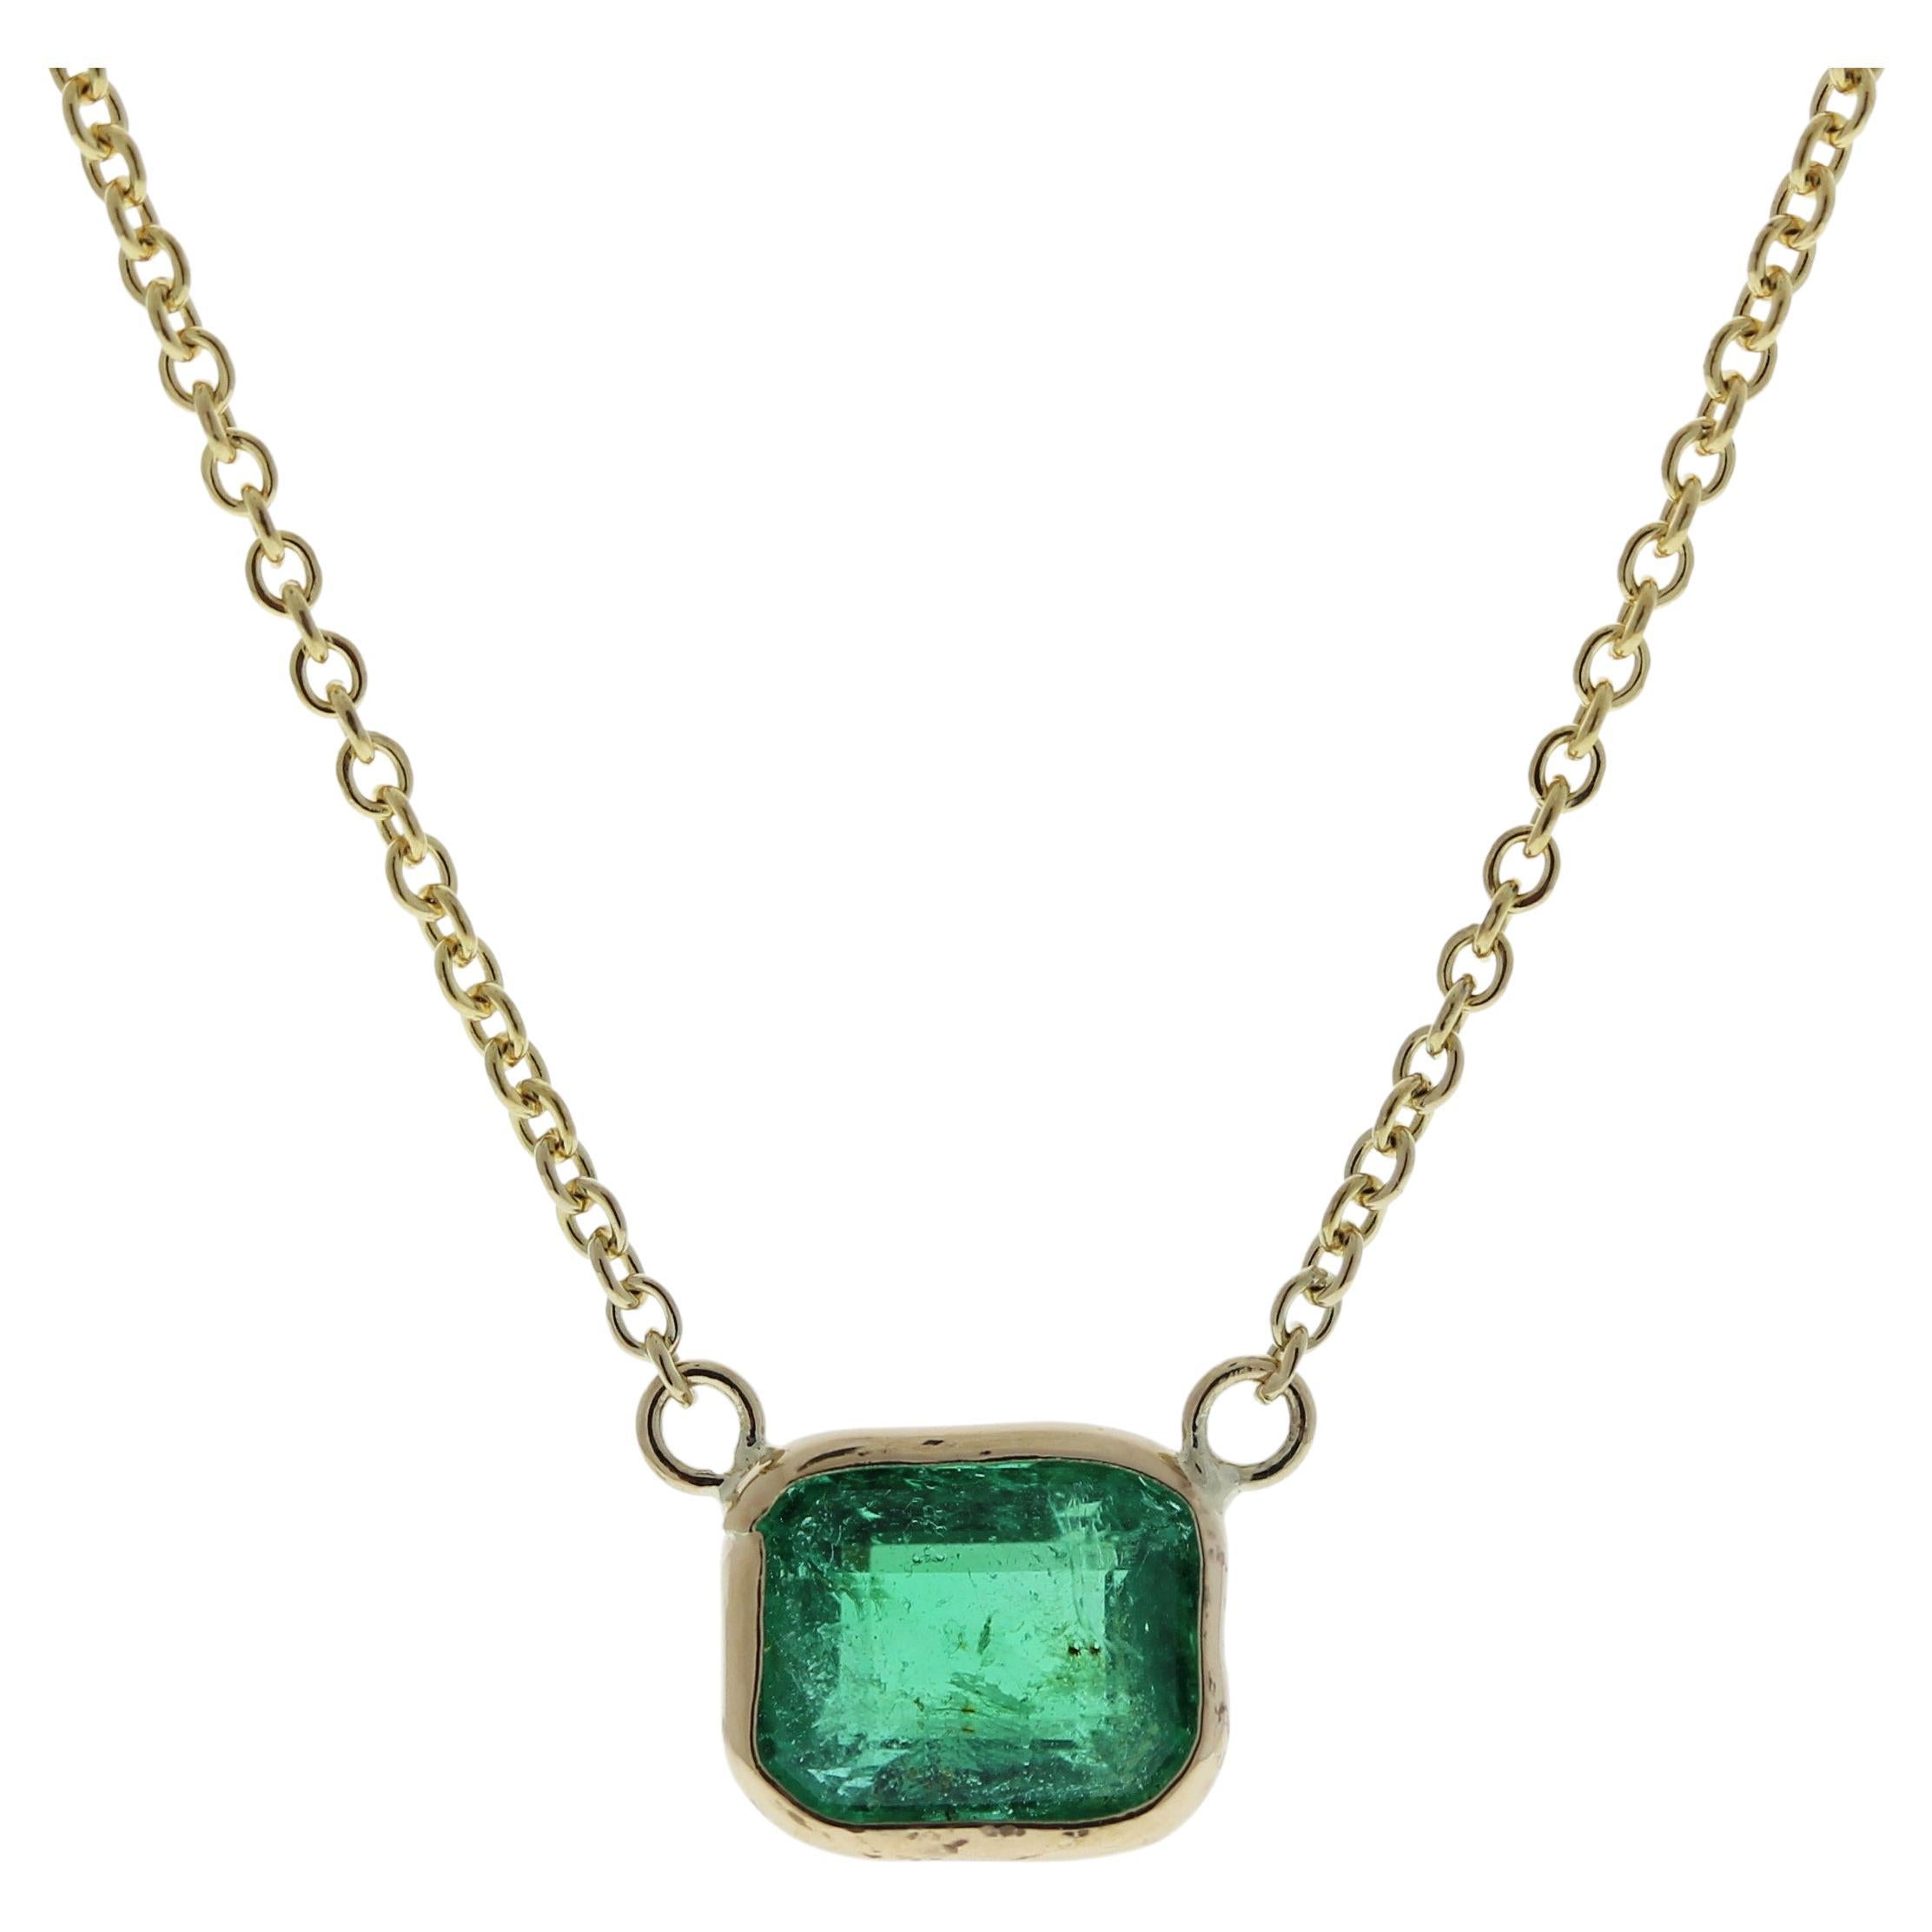 1.15 Carat Emerald Green Fashion Necklaces In 14k Yellow Gold